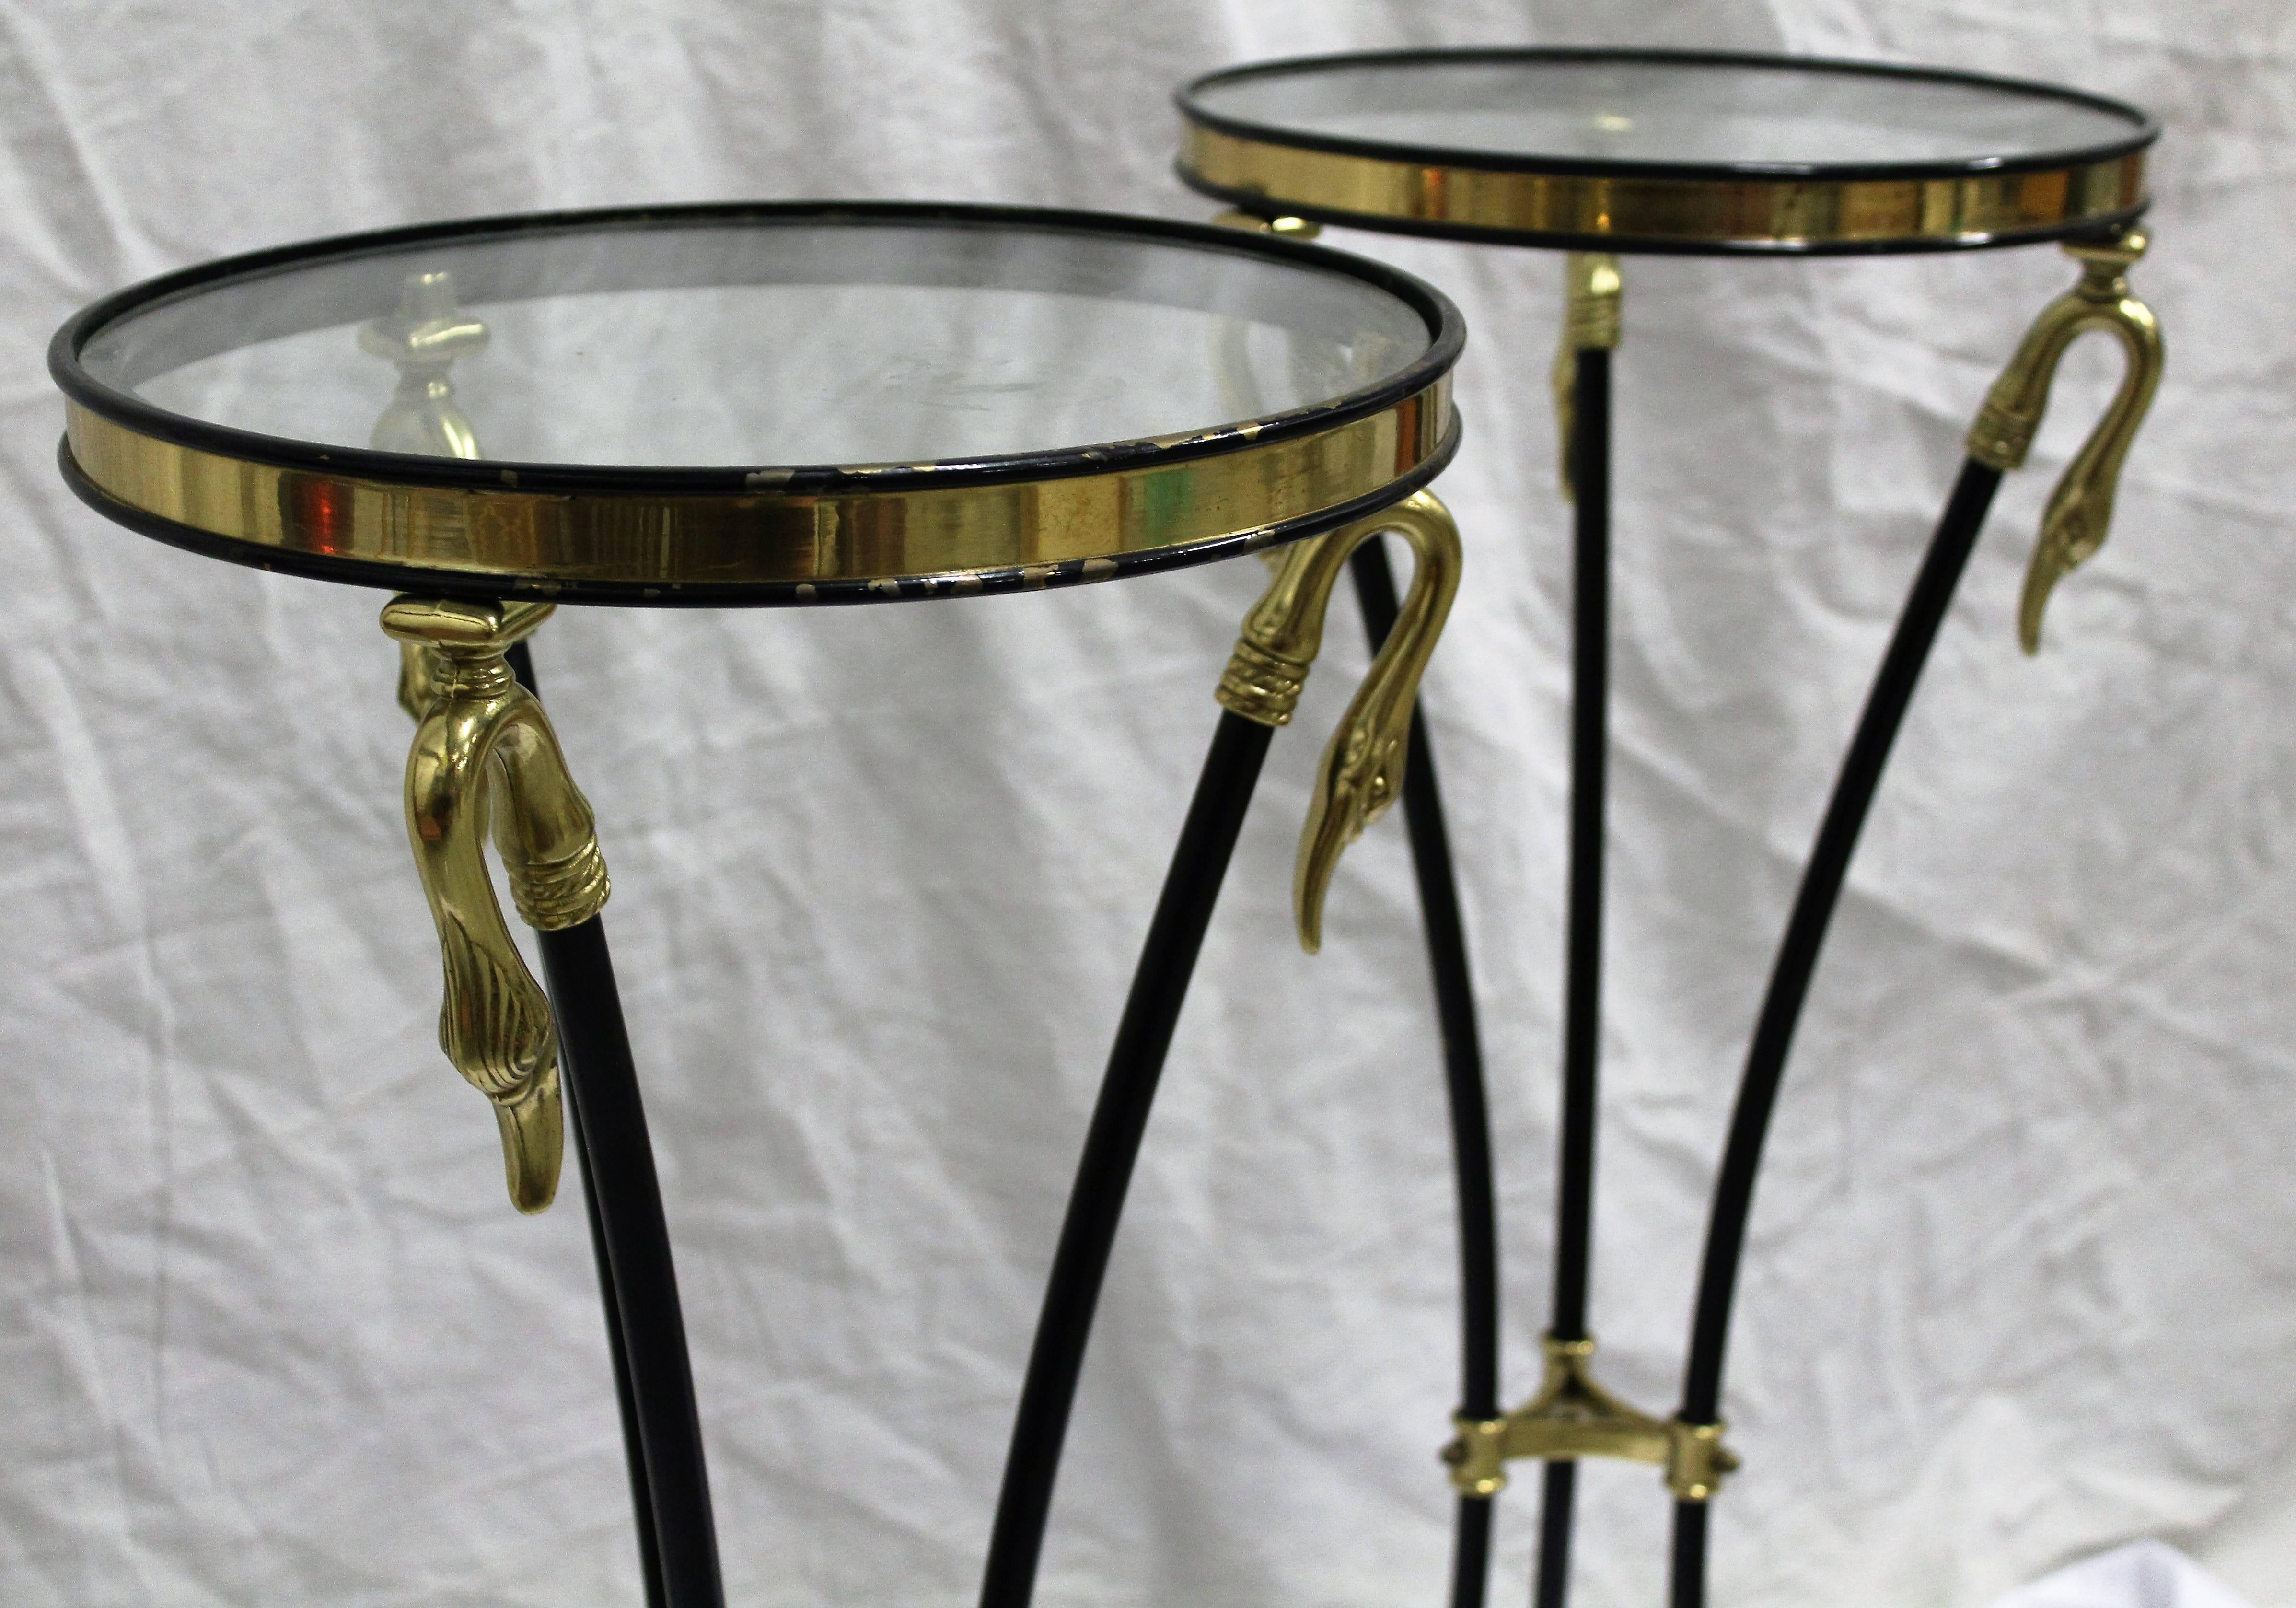 Charming pair of Empire styled pedestals. Graceful brass swan heads base the brass and glass top and curved ebonized legs provide brass claw feet to complete the simplicity of the design.